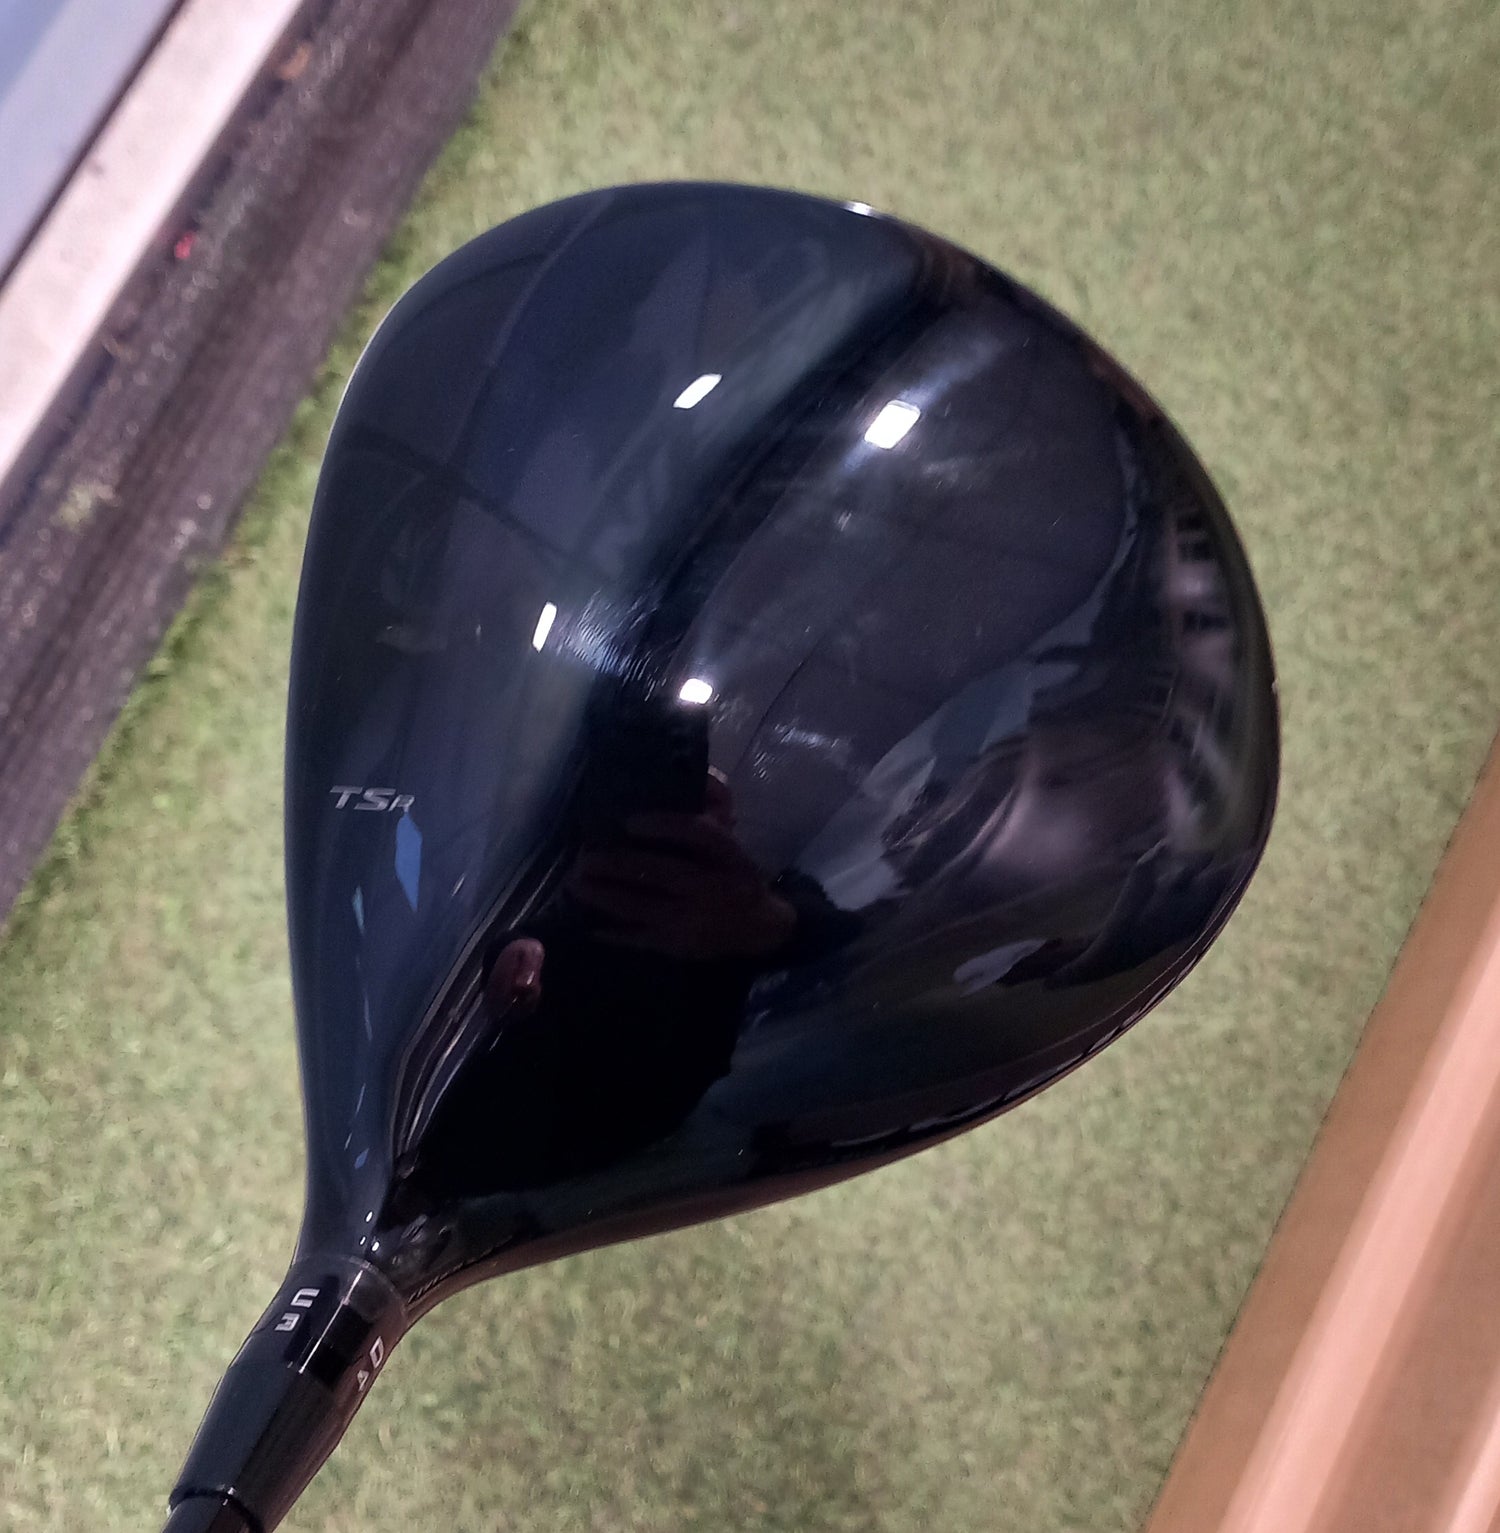 Titleist Golf TSR2 Driver 10 Degree Mens Right Hand Stiff Pre Owned   